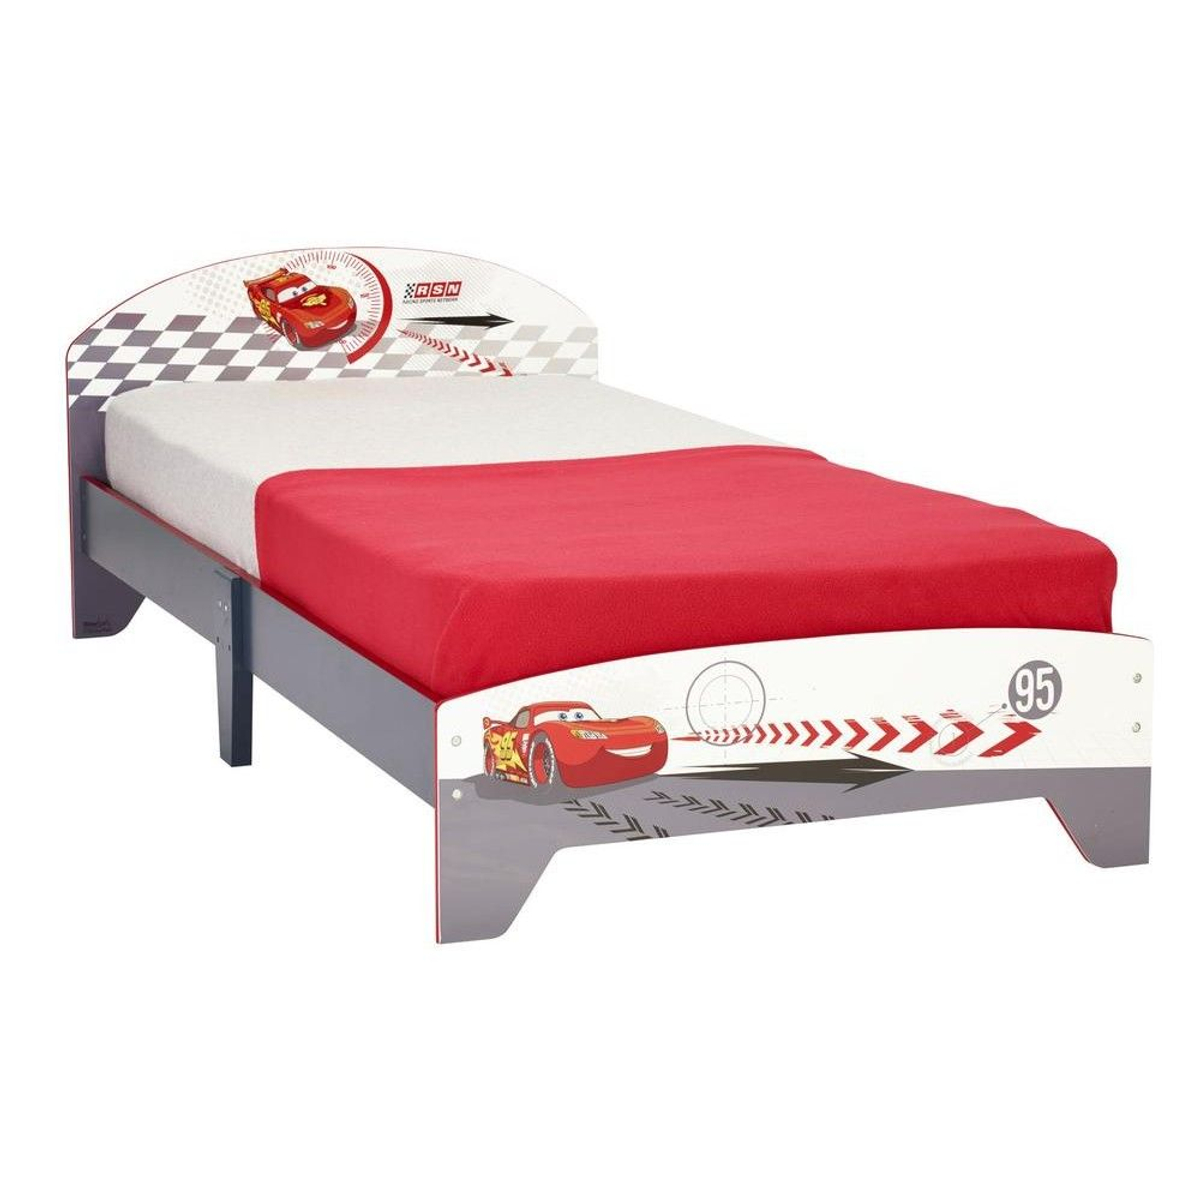 Cars Speed Circuit Single Bed